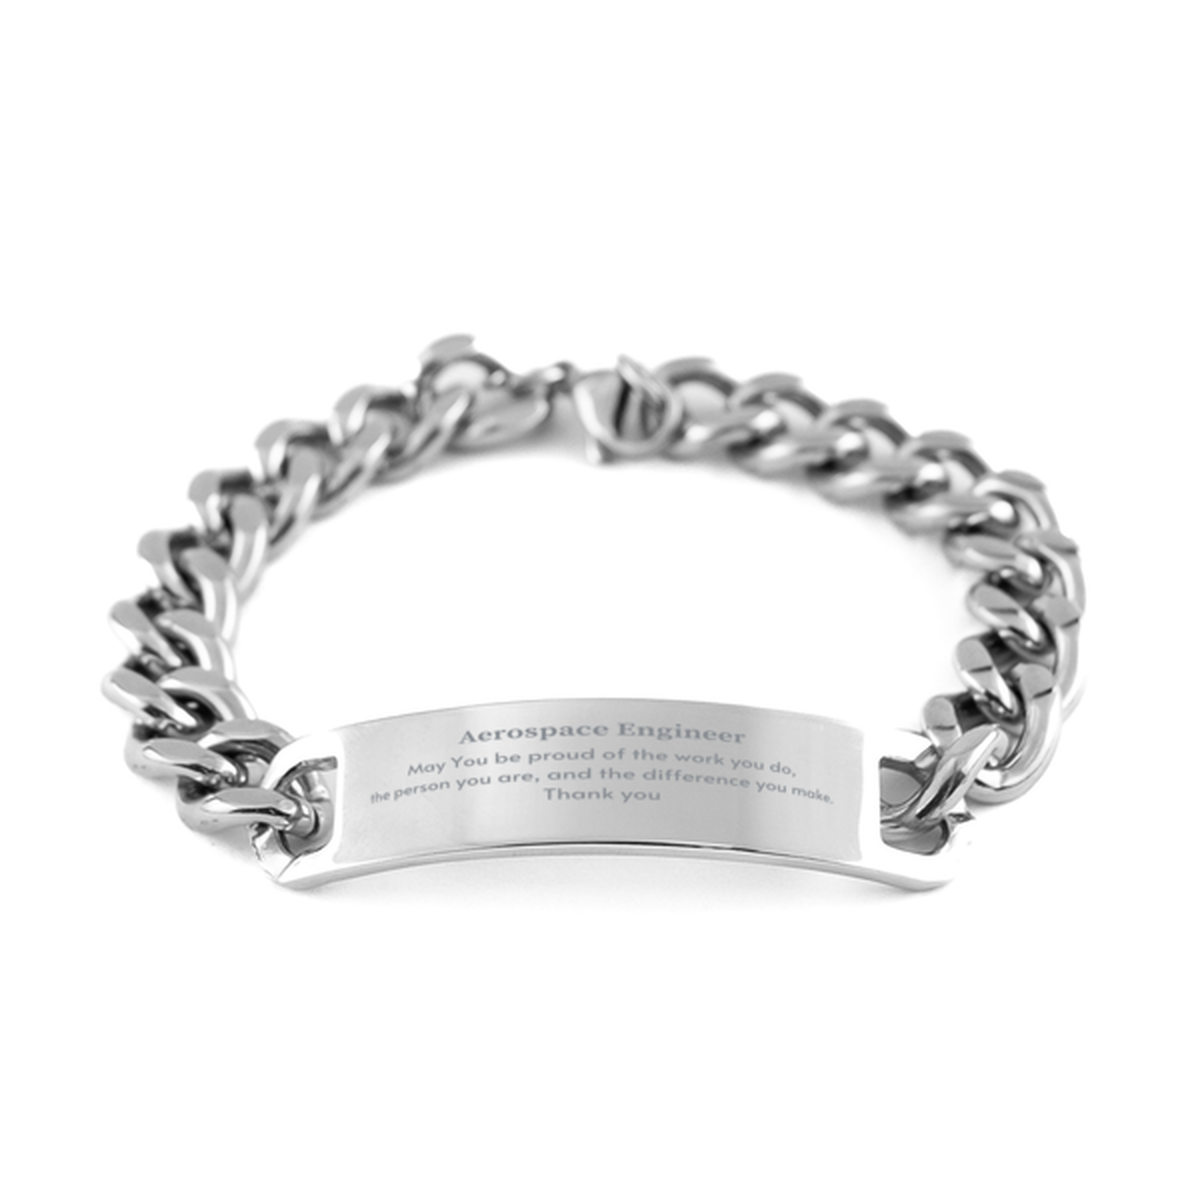 Heartwarming Cuban Chain Stainless Steel Bracelet Retirement Coworkers Gifts for Aerospace Engineer, Aerospace Engineer May You be proud of the work you do, the person you are Gifts for Boss Men Women Friends